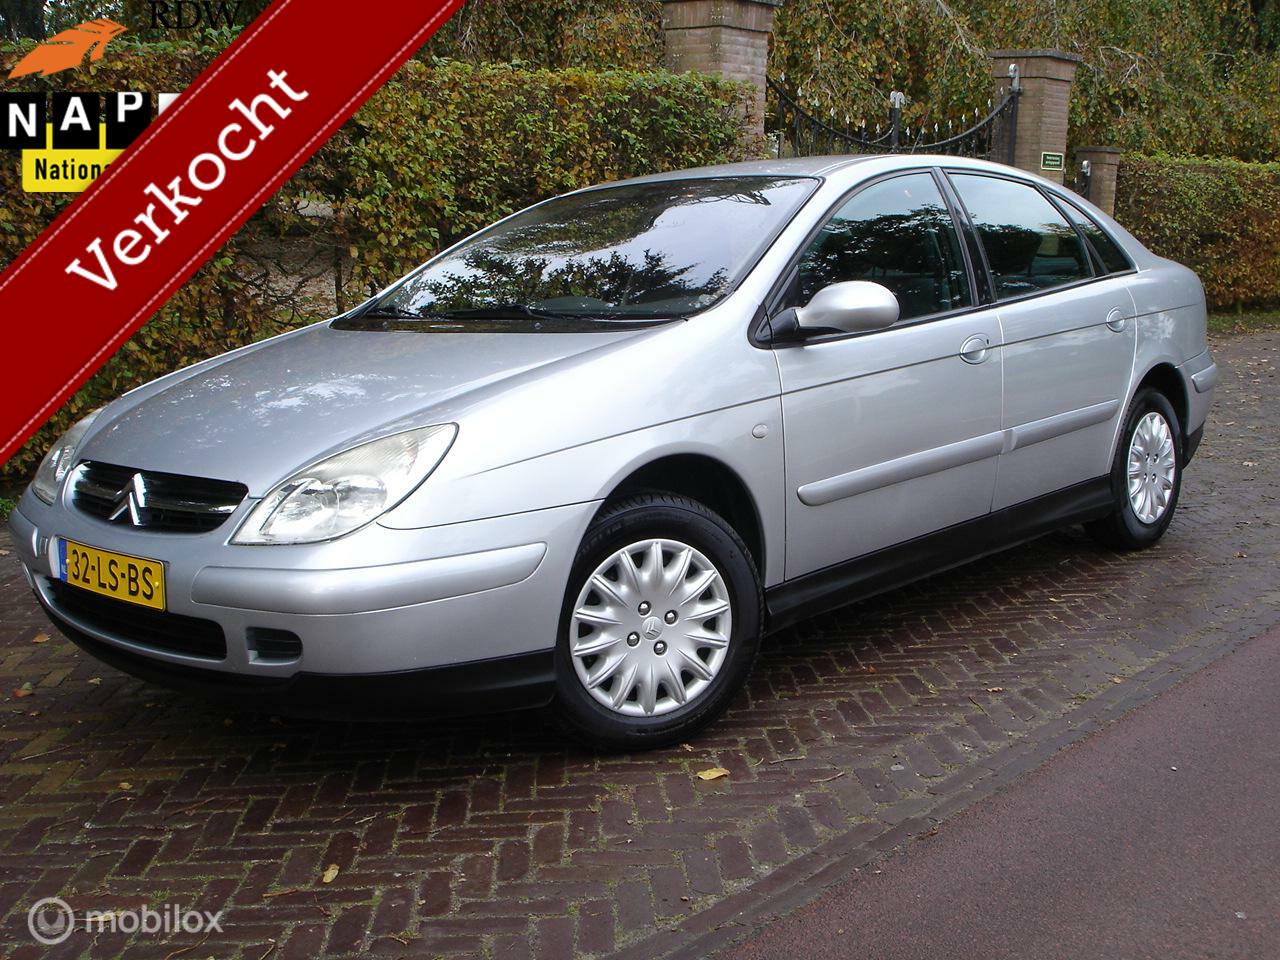 CITROËN C5 1.8-16 DIFFÉRENCE CLIMA AIRCO CRUISE NIEUWSTAAT !